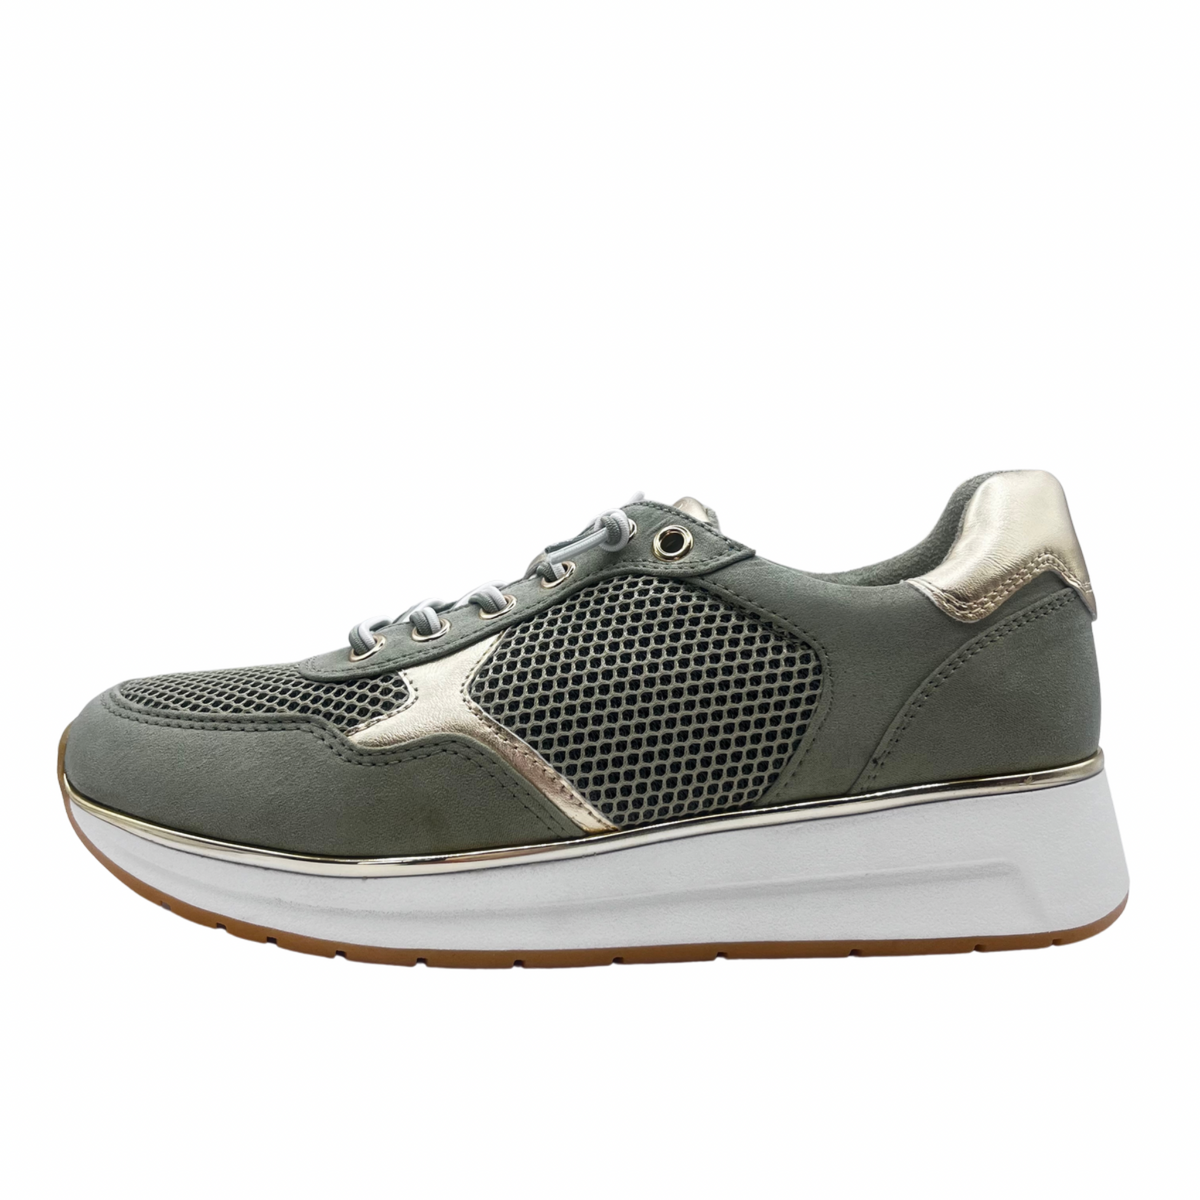 Marco Tozzi Sage Green Trainer With Gold